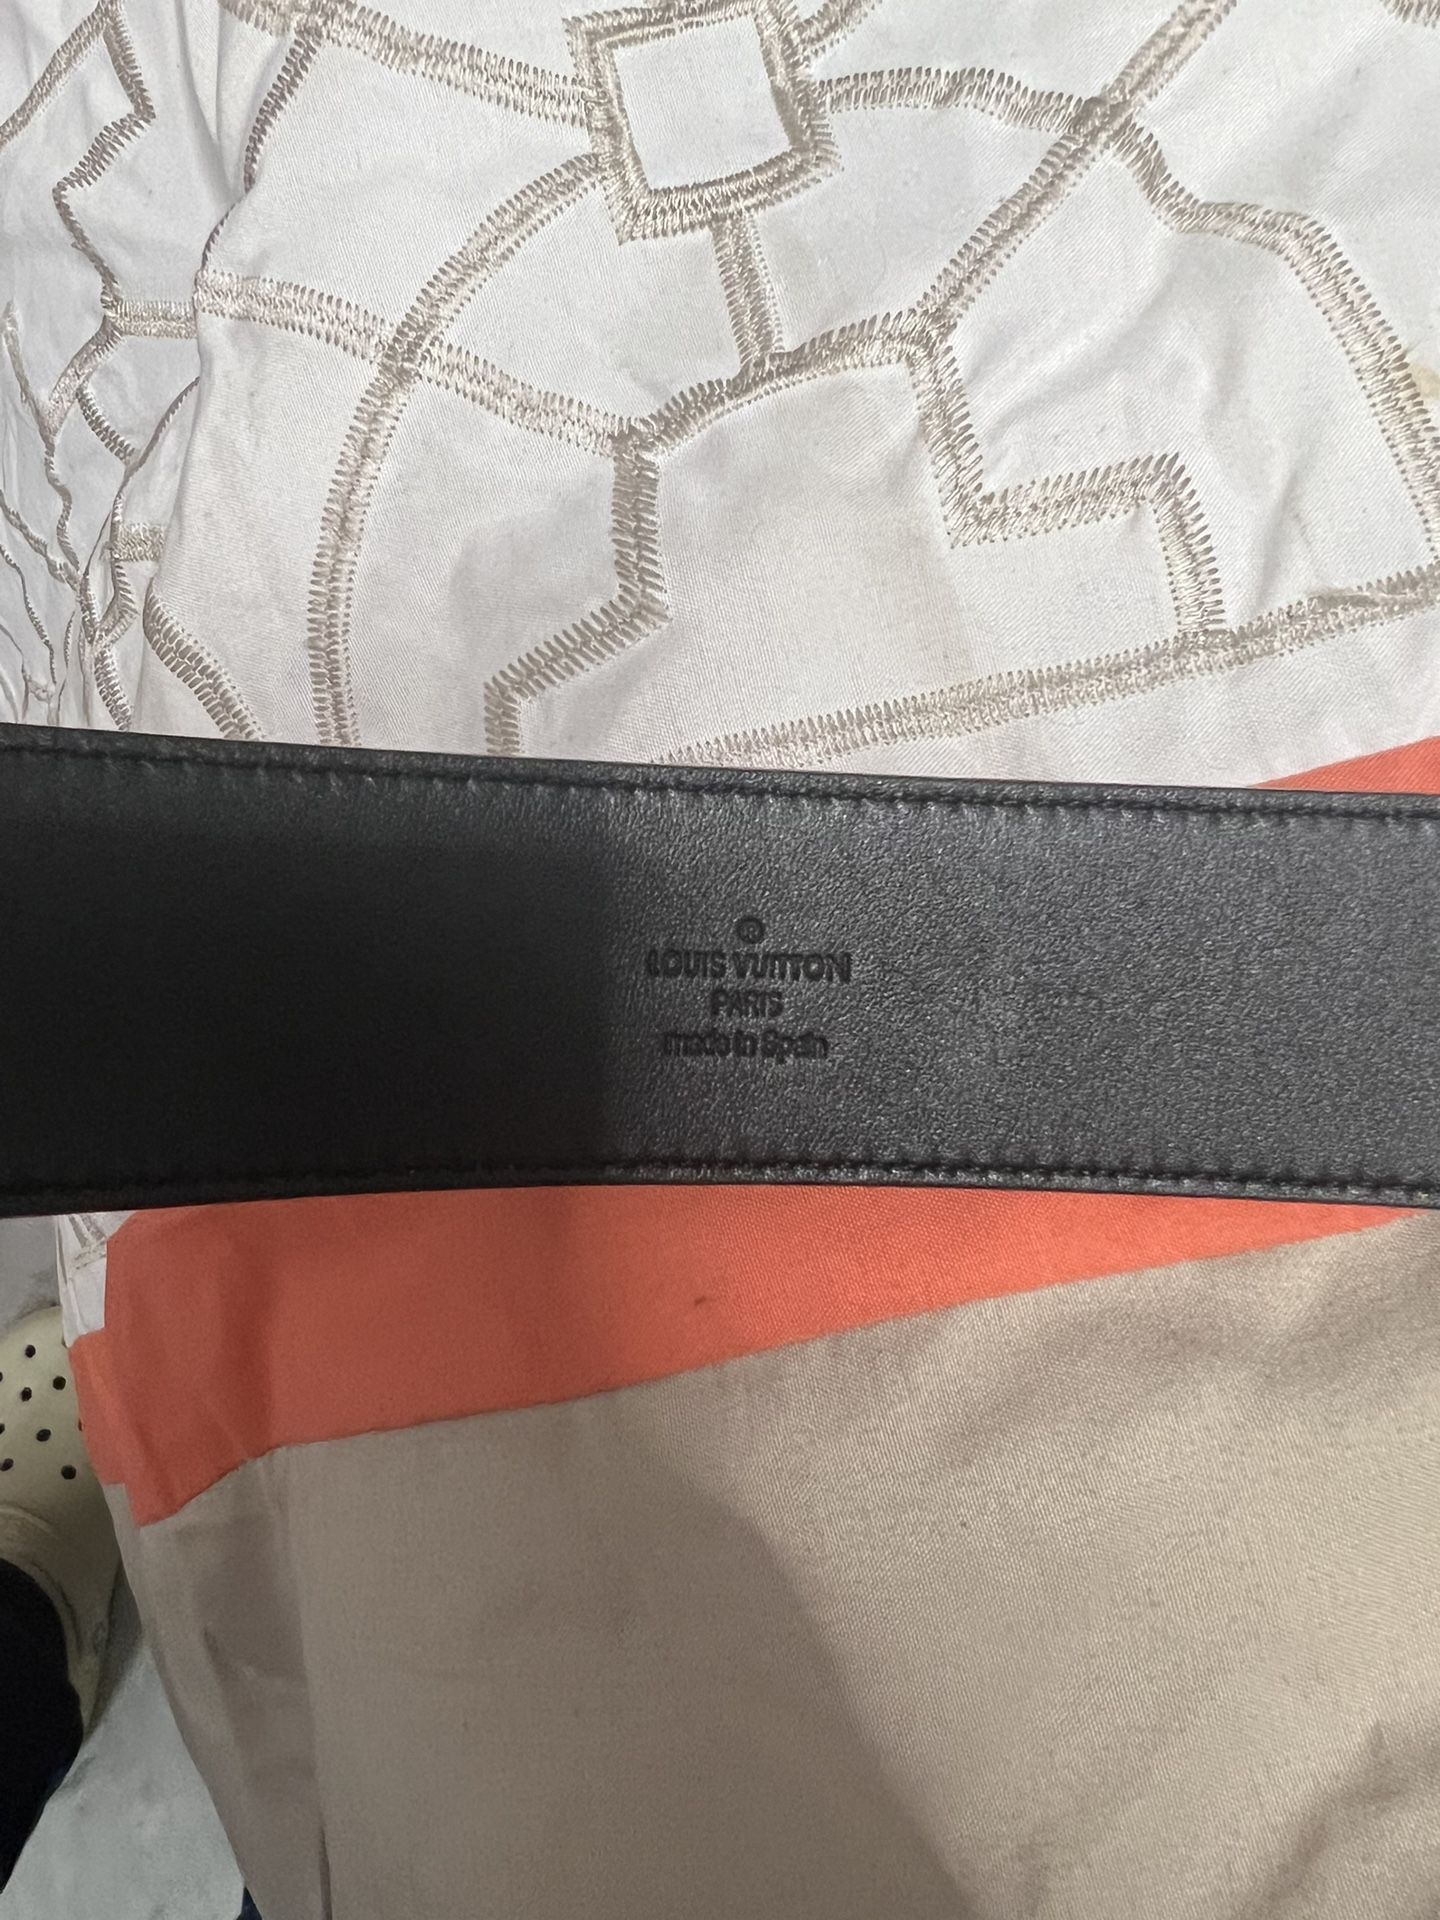 Supreme Lv Belt Buddha And Cartier Braclet for Sale in